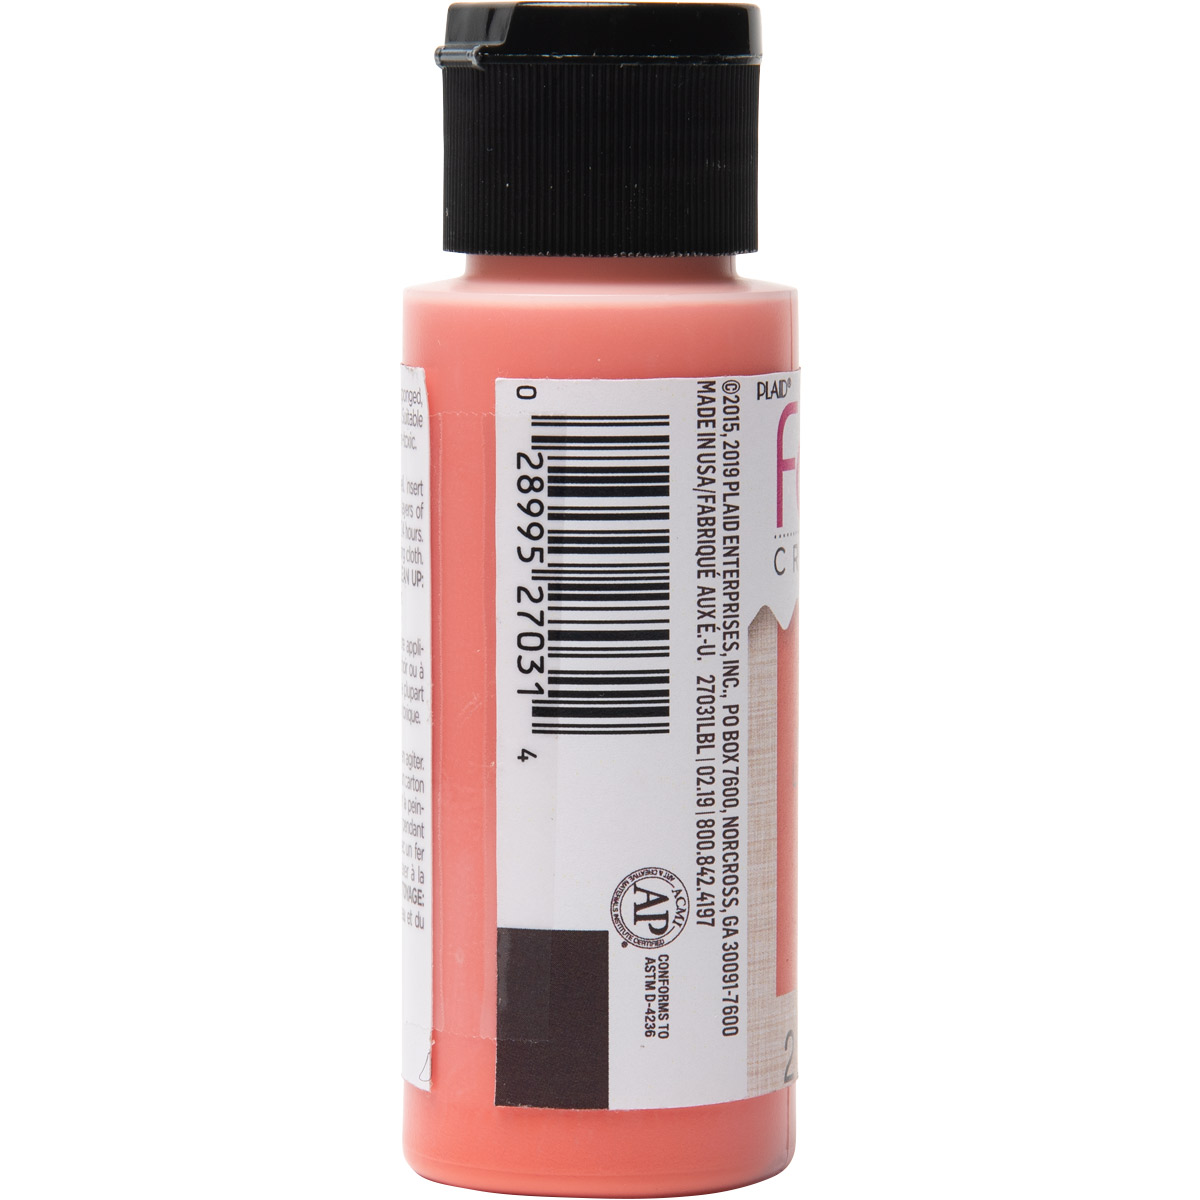 Fabric Creations™ Soft Fabric Inks - Coral, 2 oz. - 27031